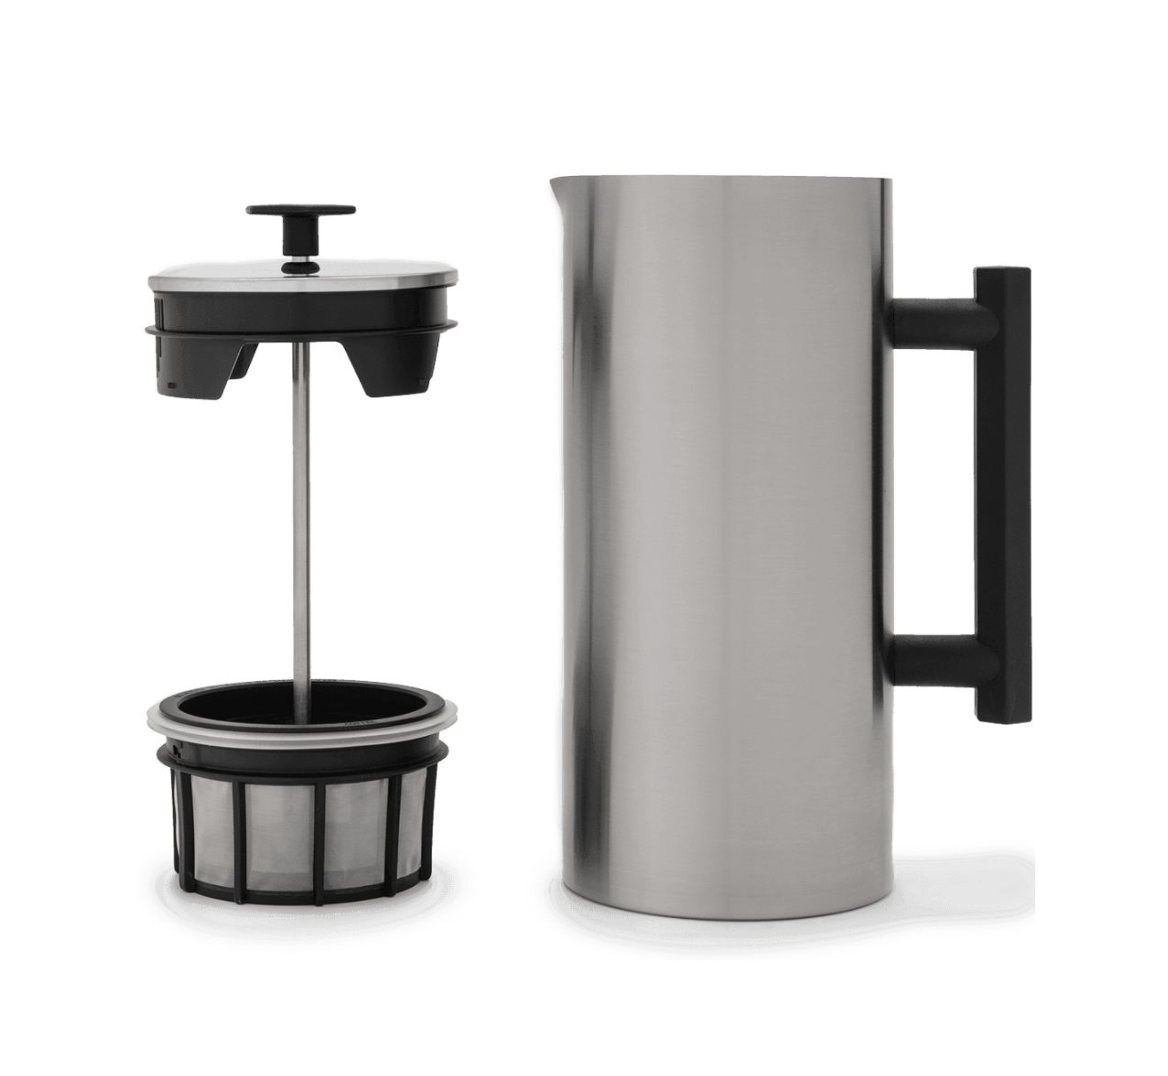 espro-p6-double-wall-press-32oz-stainless-steel